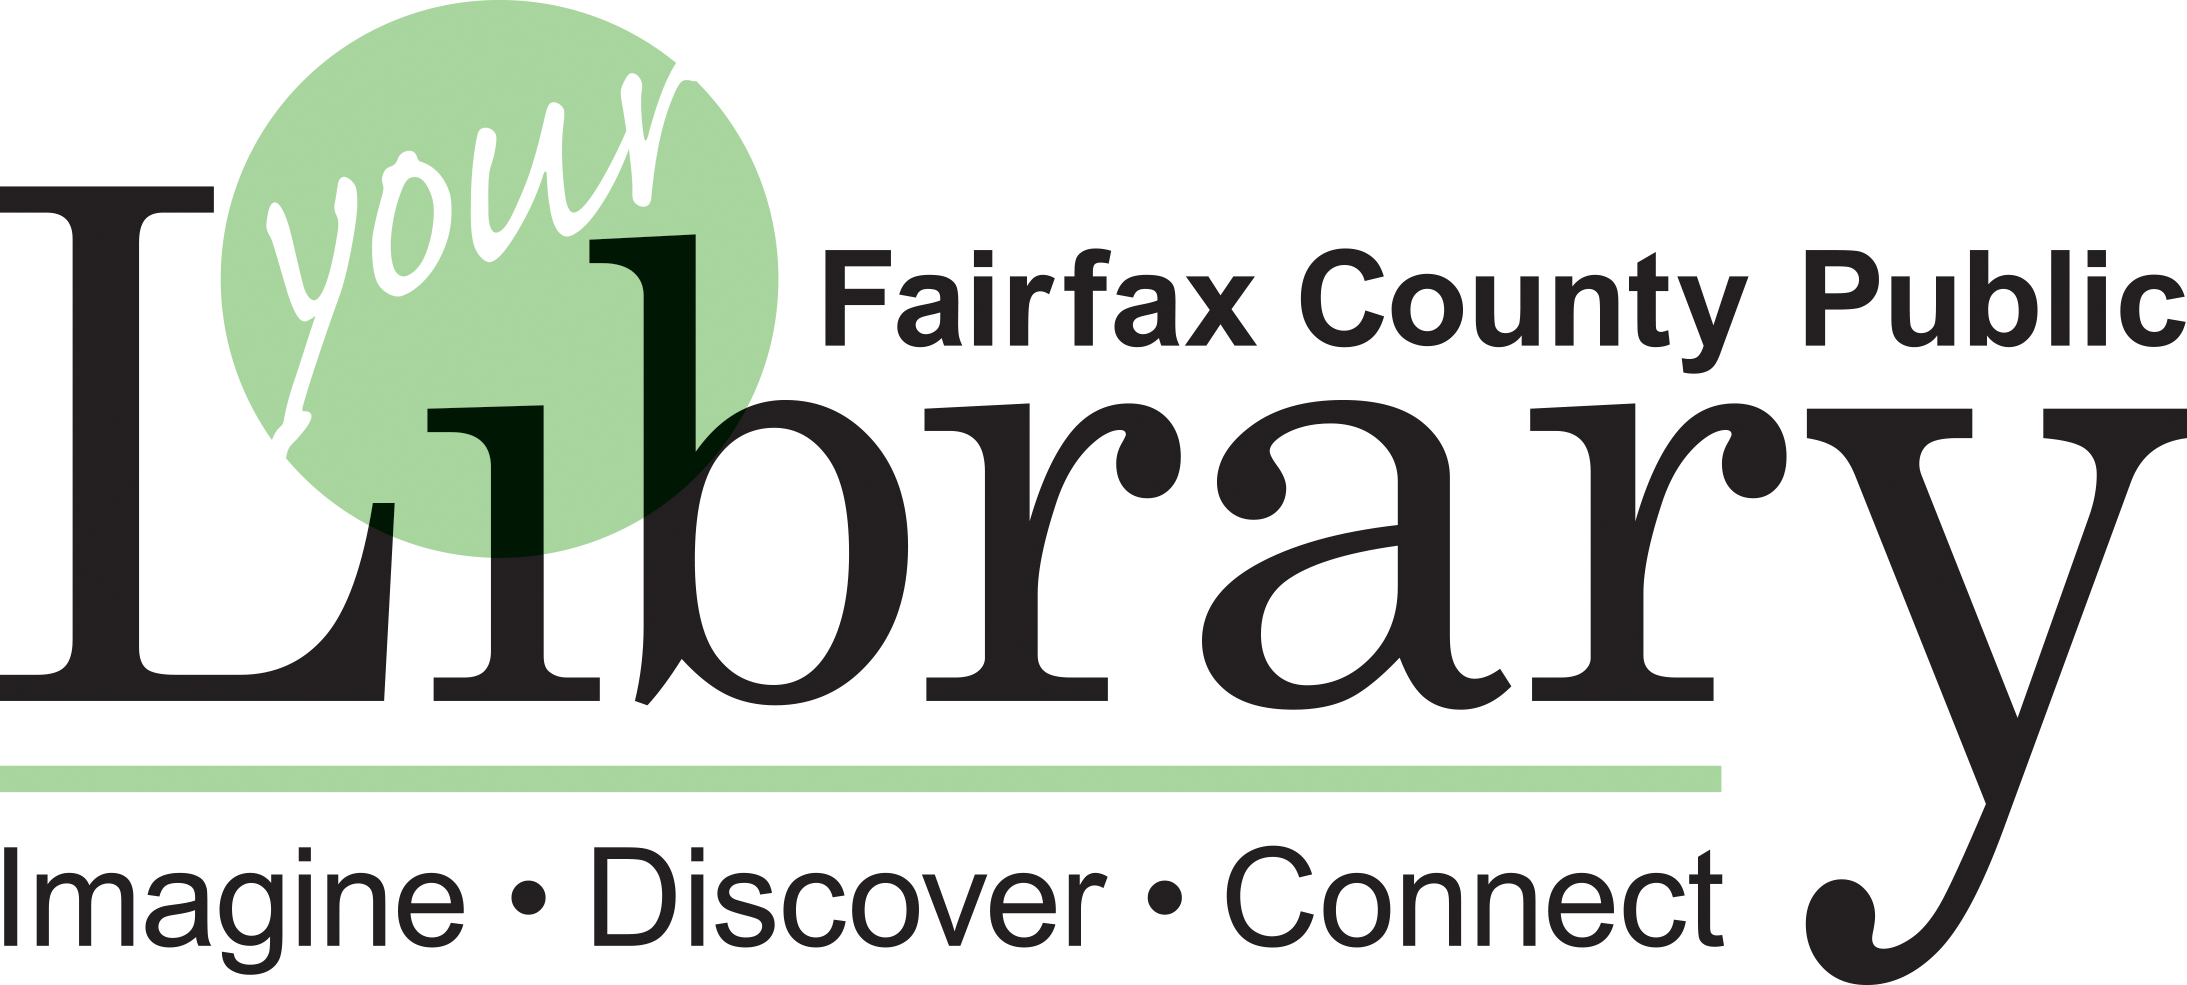 fairfax-county-public-library-free-texts-free-download-borrow-and